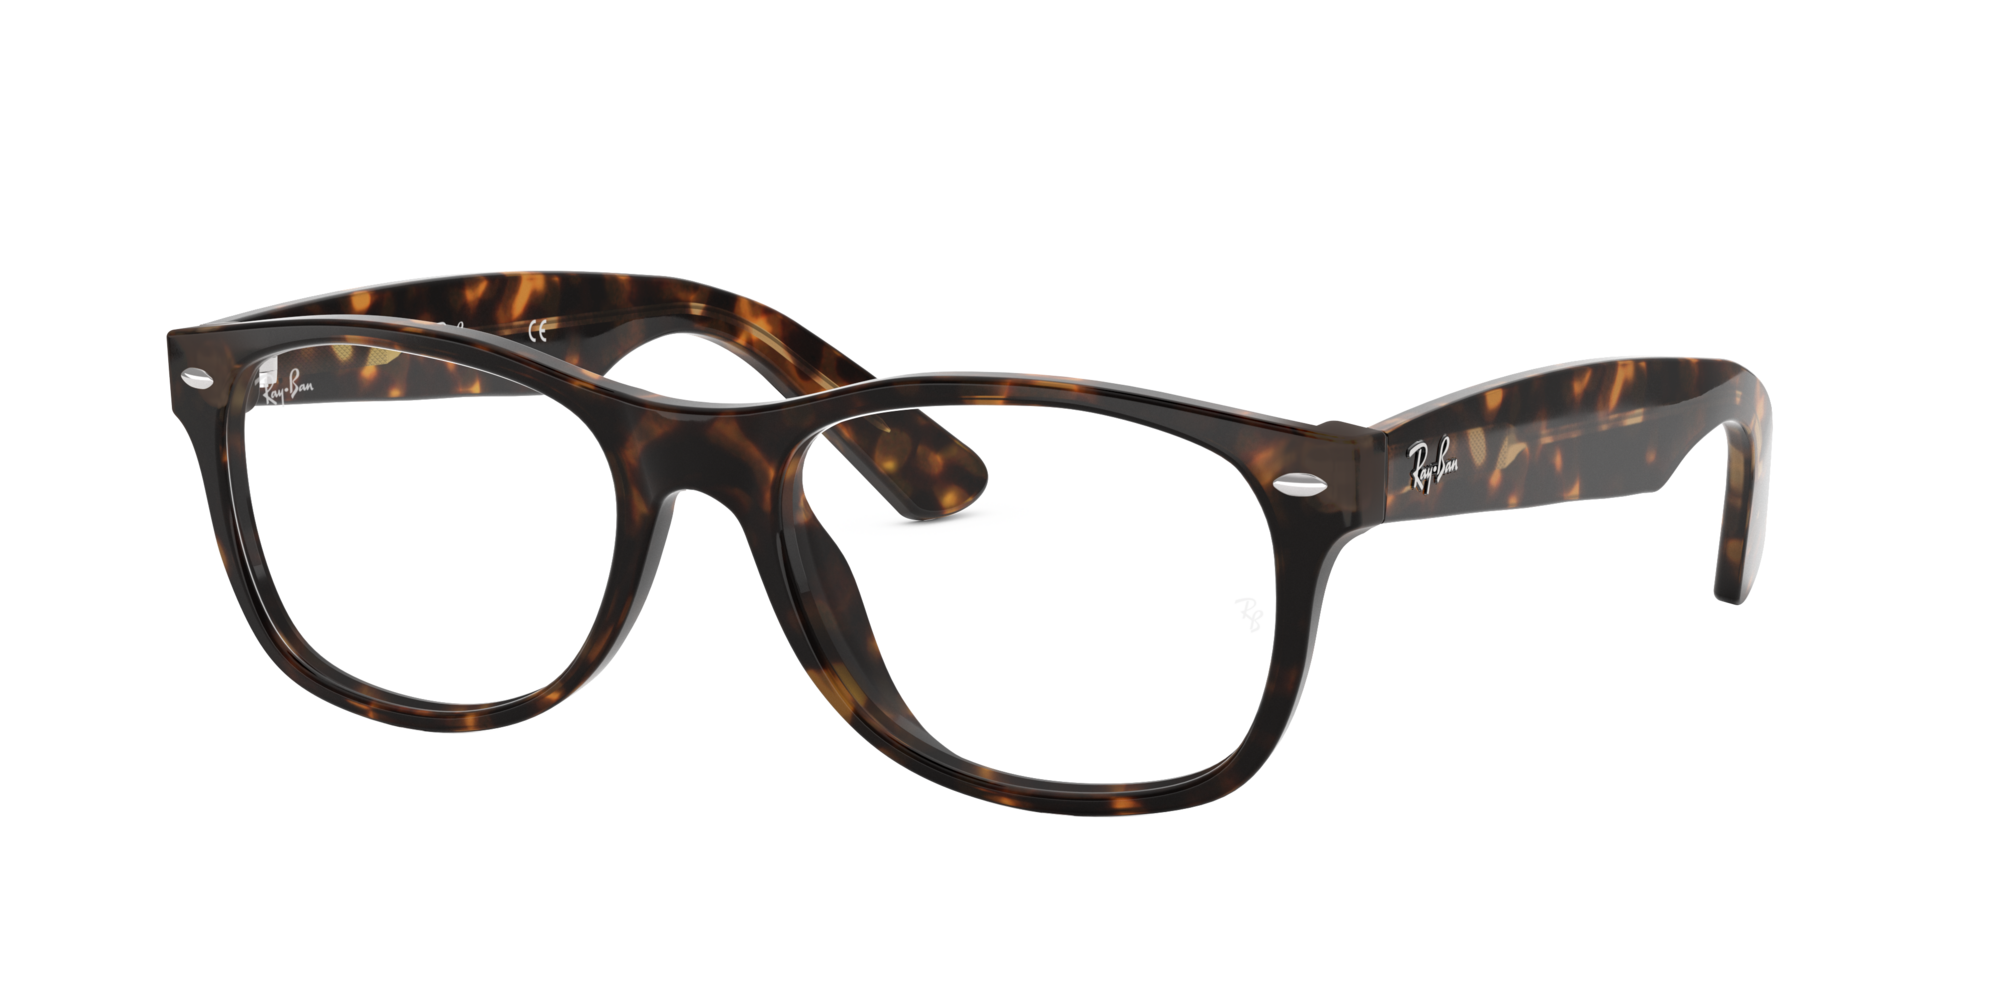 Ray-Ban 0RX5184 in Tortoise Glasses | OPSM